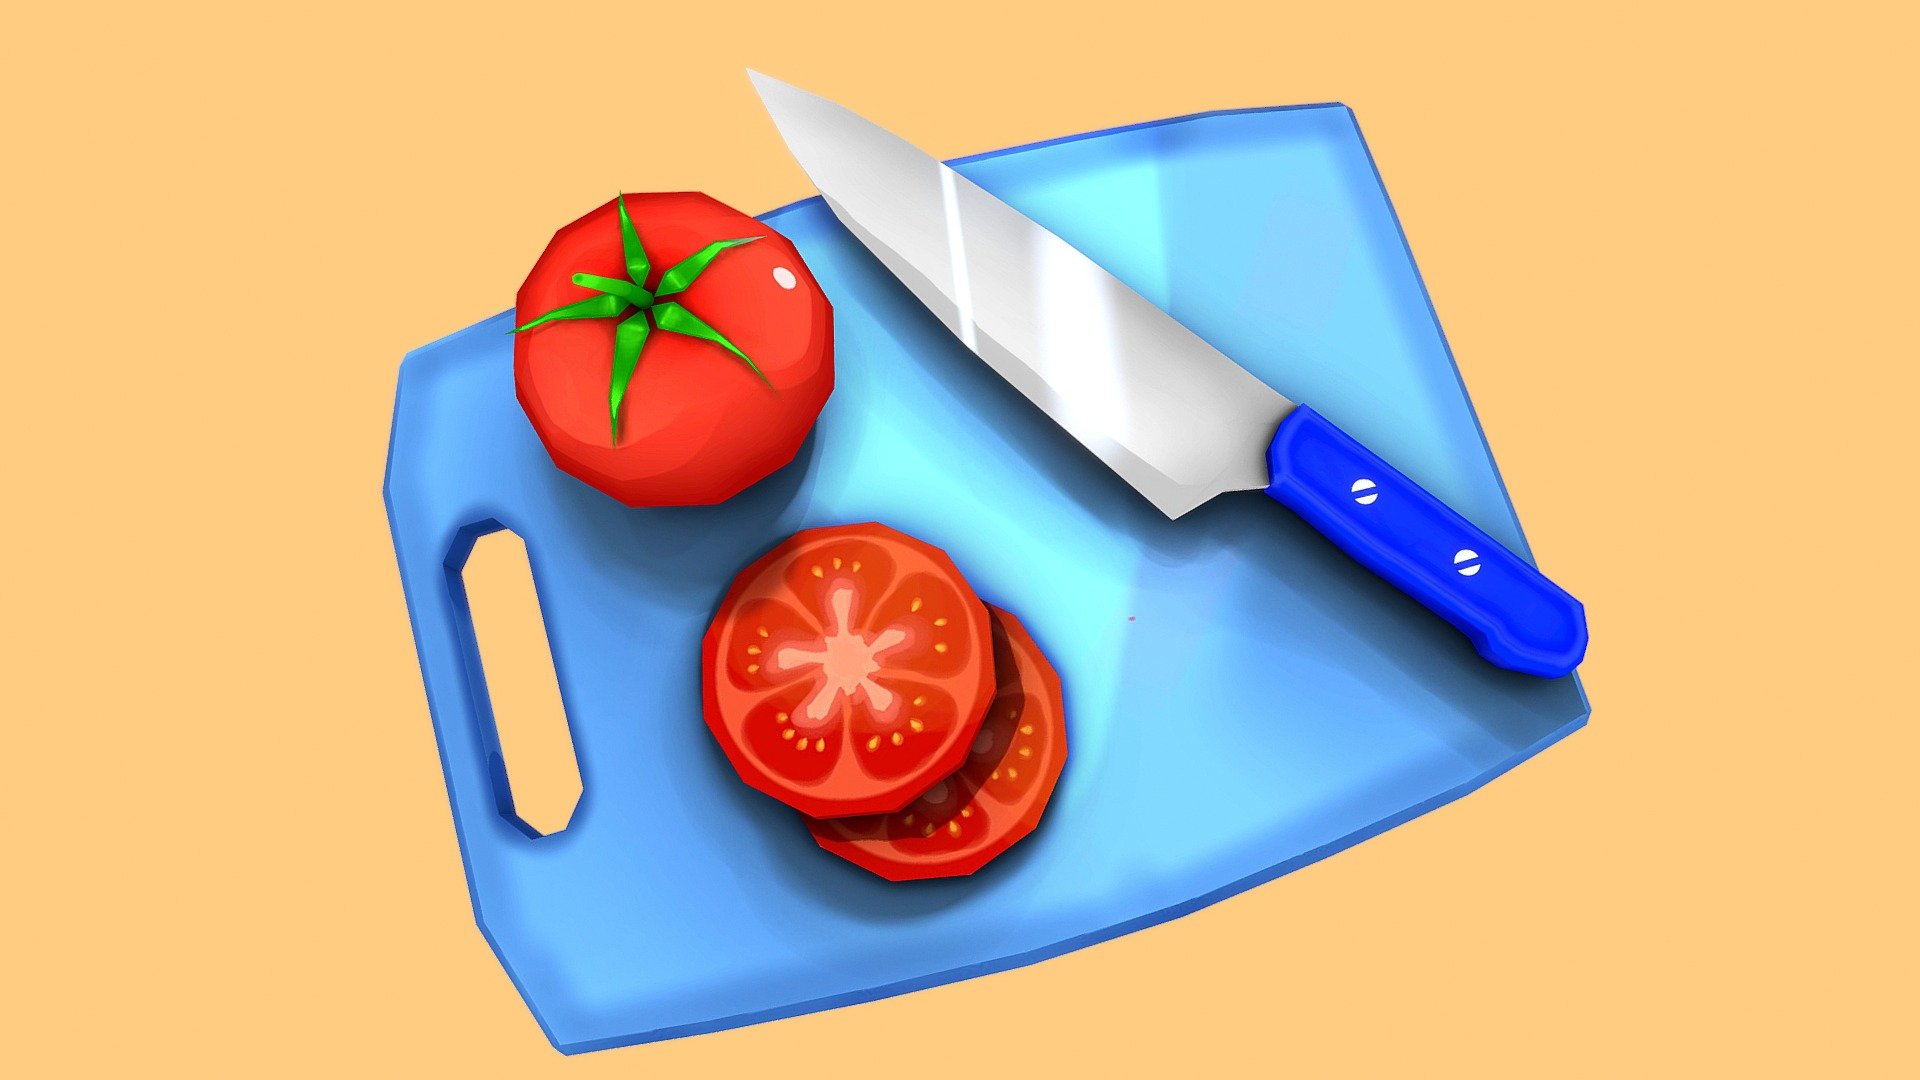 Stylized Low Poly Cutting Board with a knife and tomato slices Asset made for a 3d mobile game.

I used 3ds Max for modeling and UV and Substance Painter for texturing 3d model